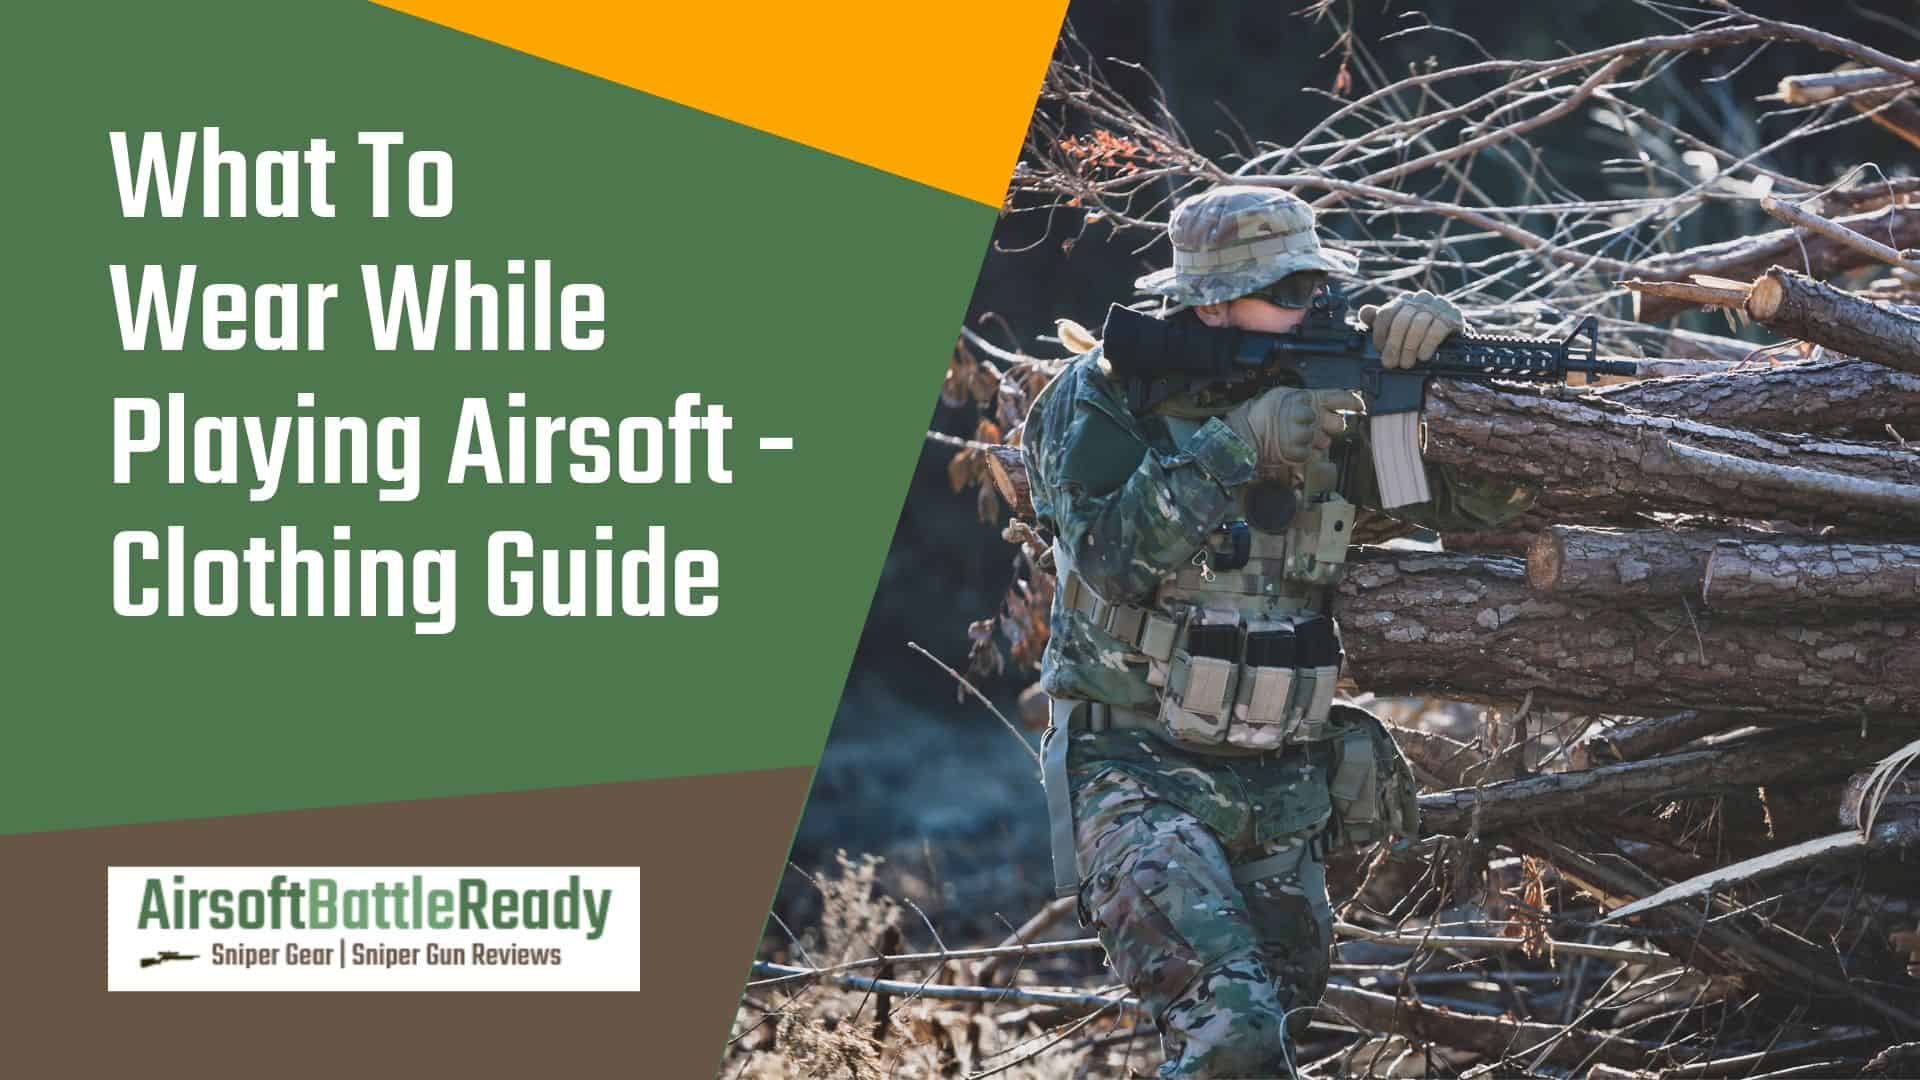 What To Wear While Playing Airsoft - Clothing Guide - Airsoft Battle Ready